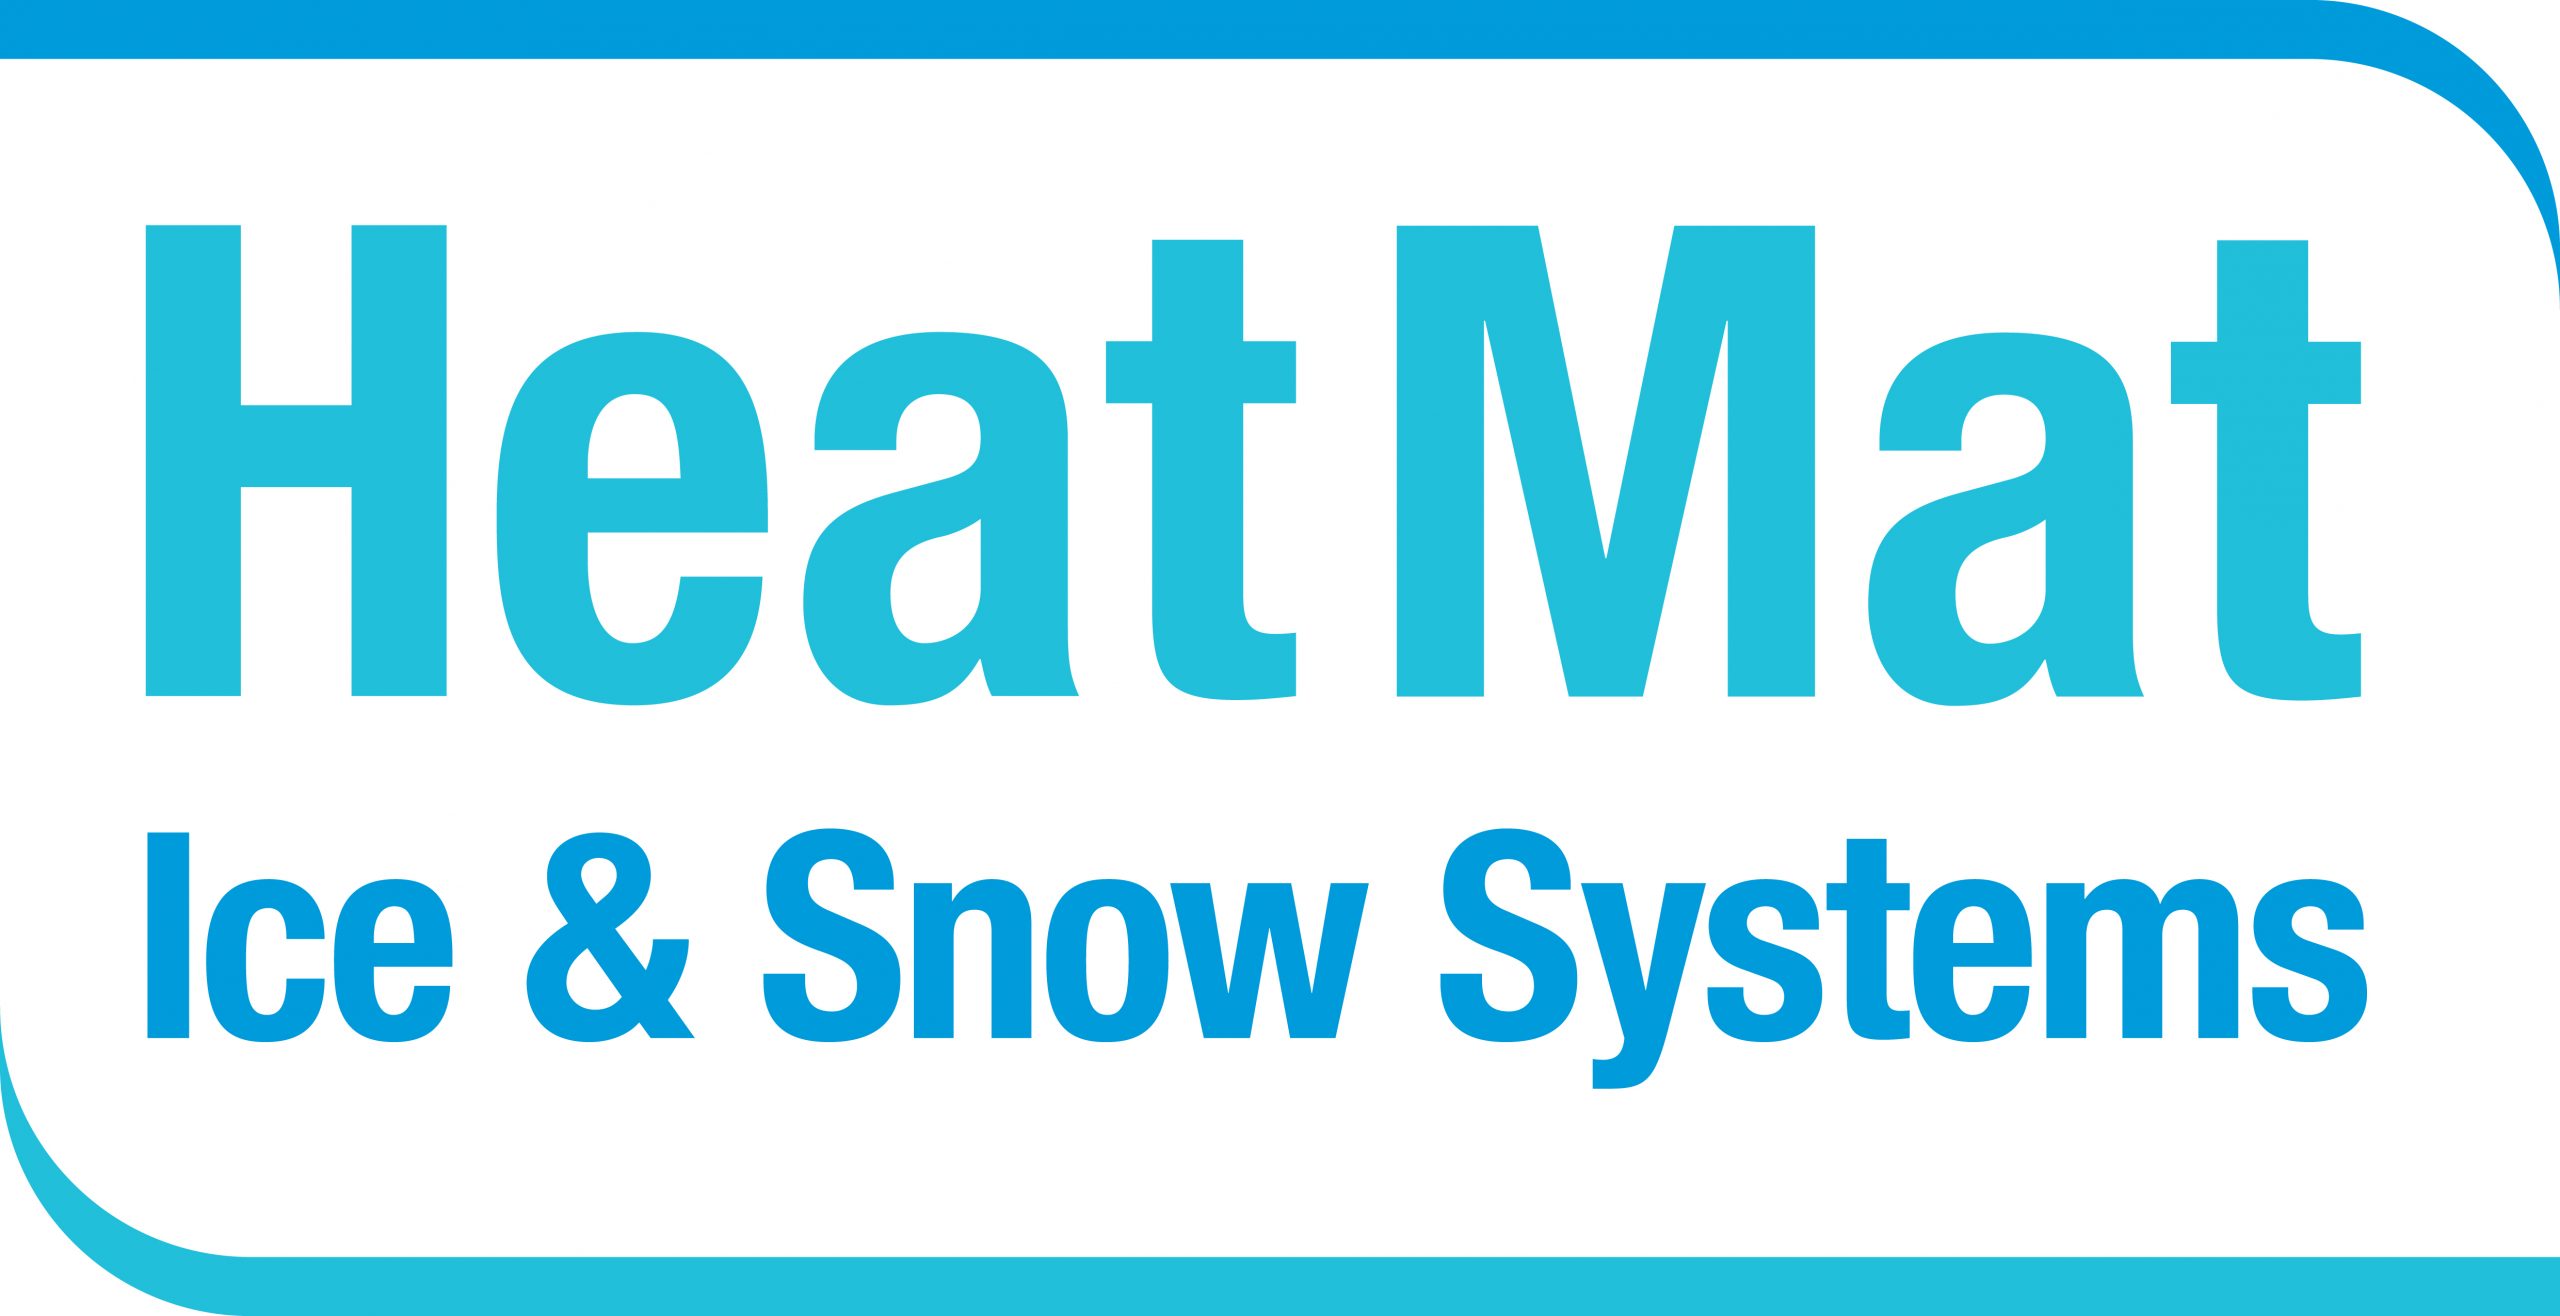 snow melting driveway and roof heating systems